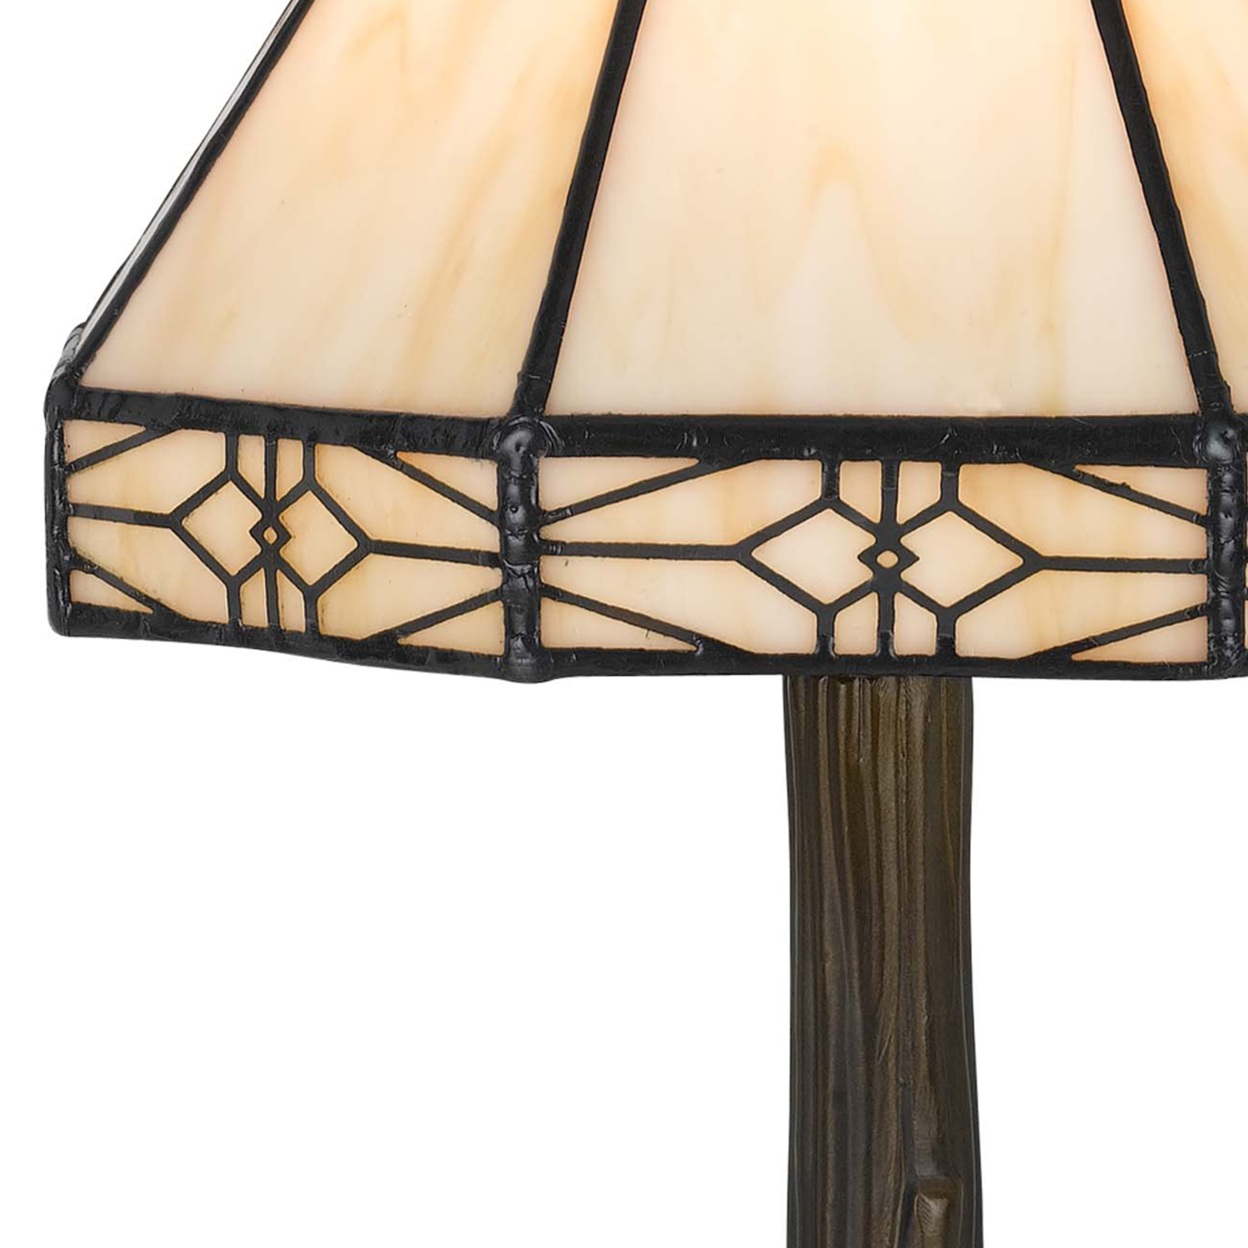 Tree Like Metal Body Tiffany Table Lamp With Conical Shade,Beige And Bronze- Saltoro Sherpi